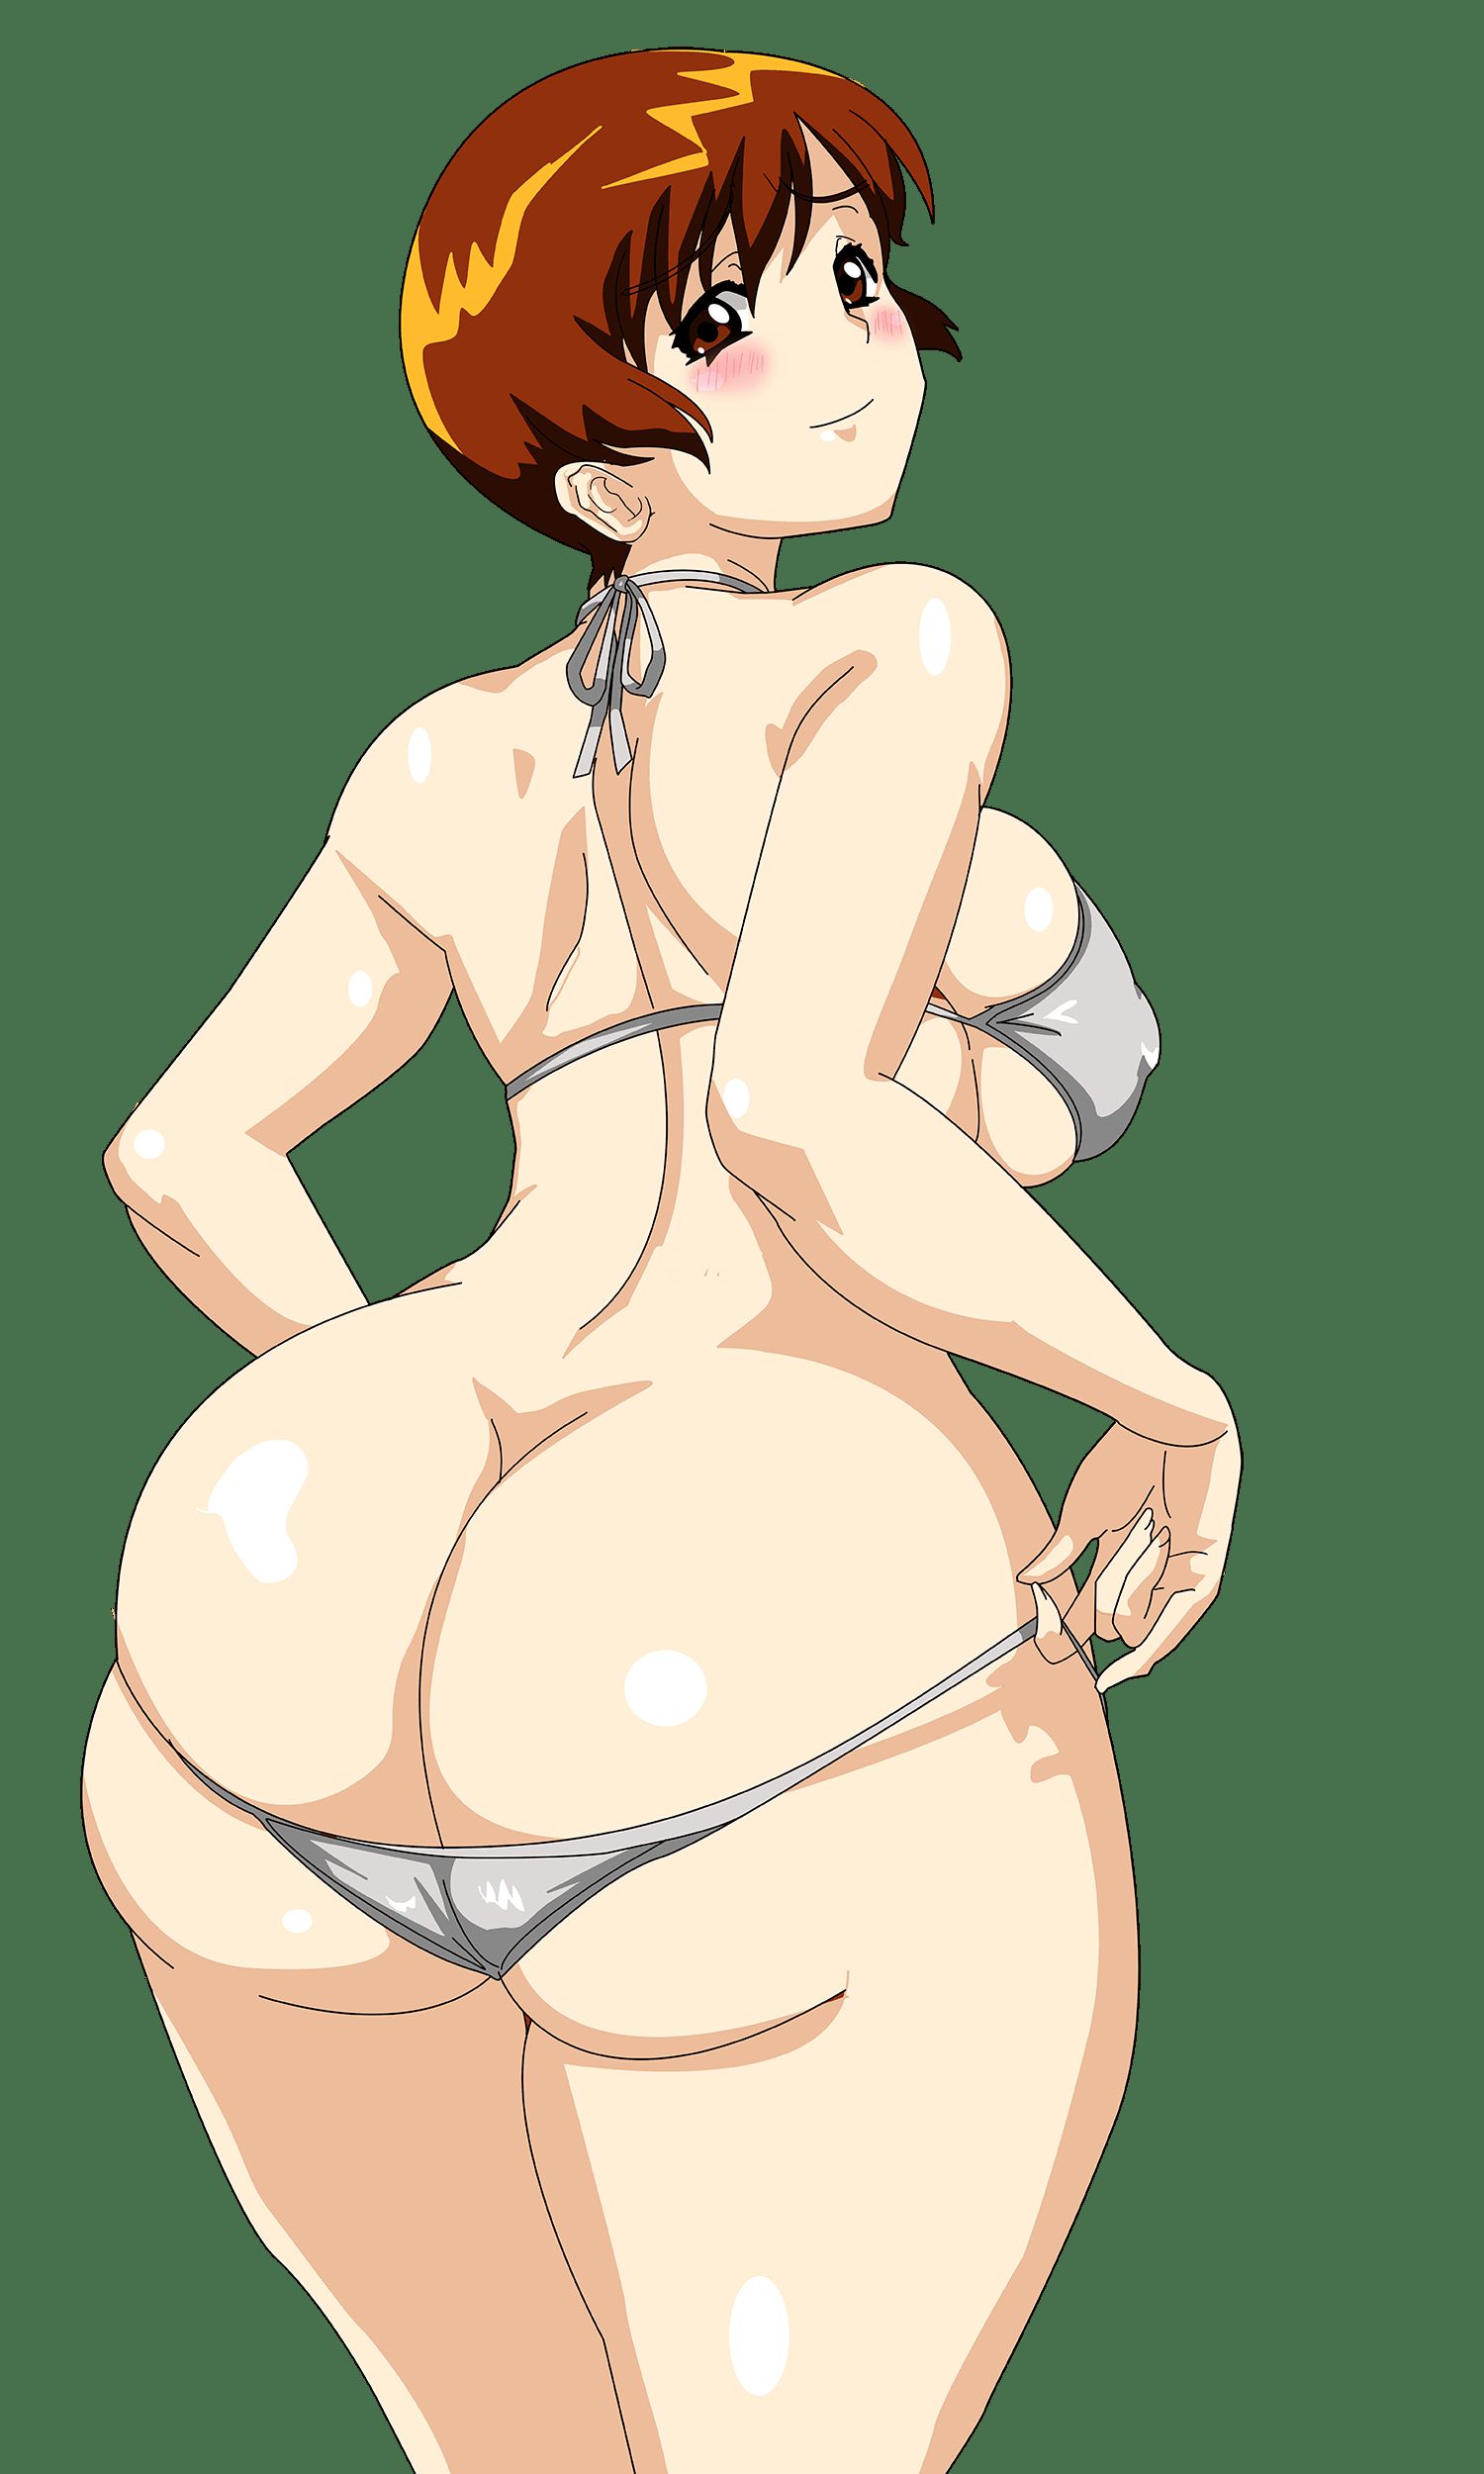 [Anime character material] png background of animated characters erotic images part 160 13